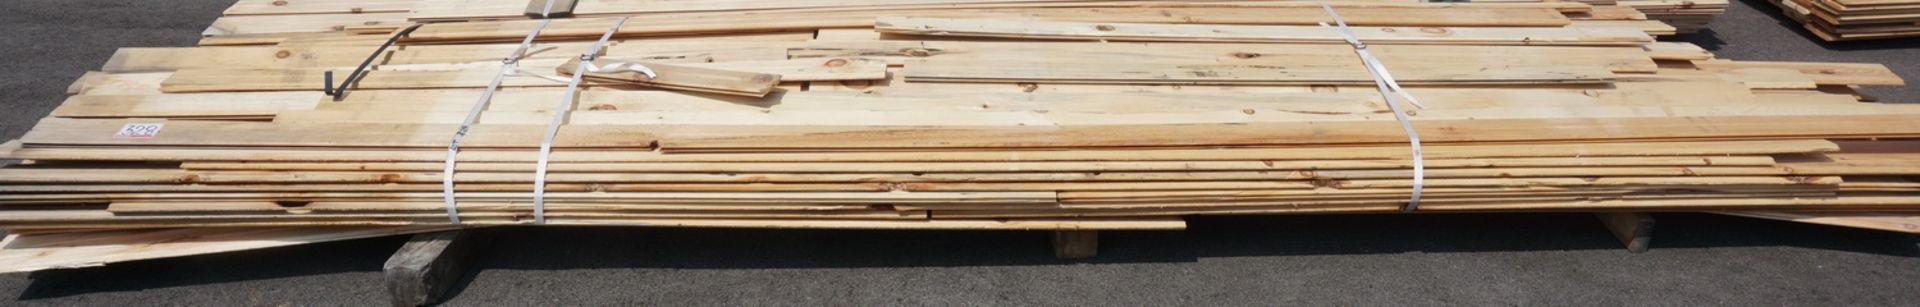 LOT - 1273' OF 1 X 5 PINE TONGUE & GROOVE LUMBER (V-GROOVE)